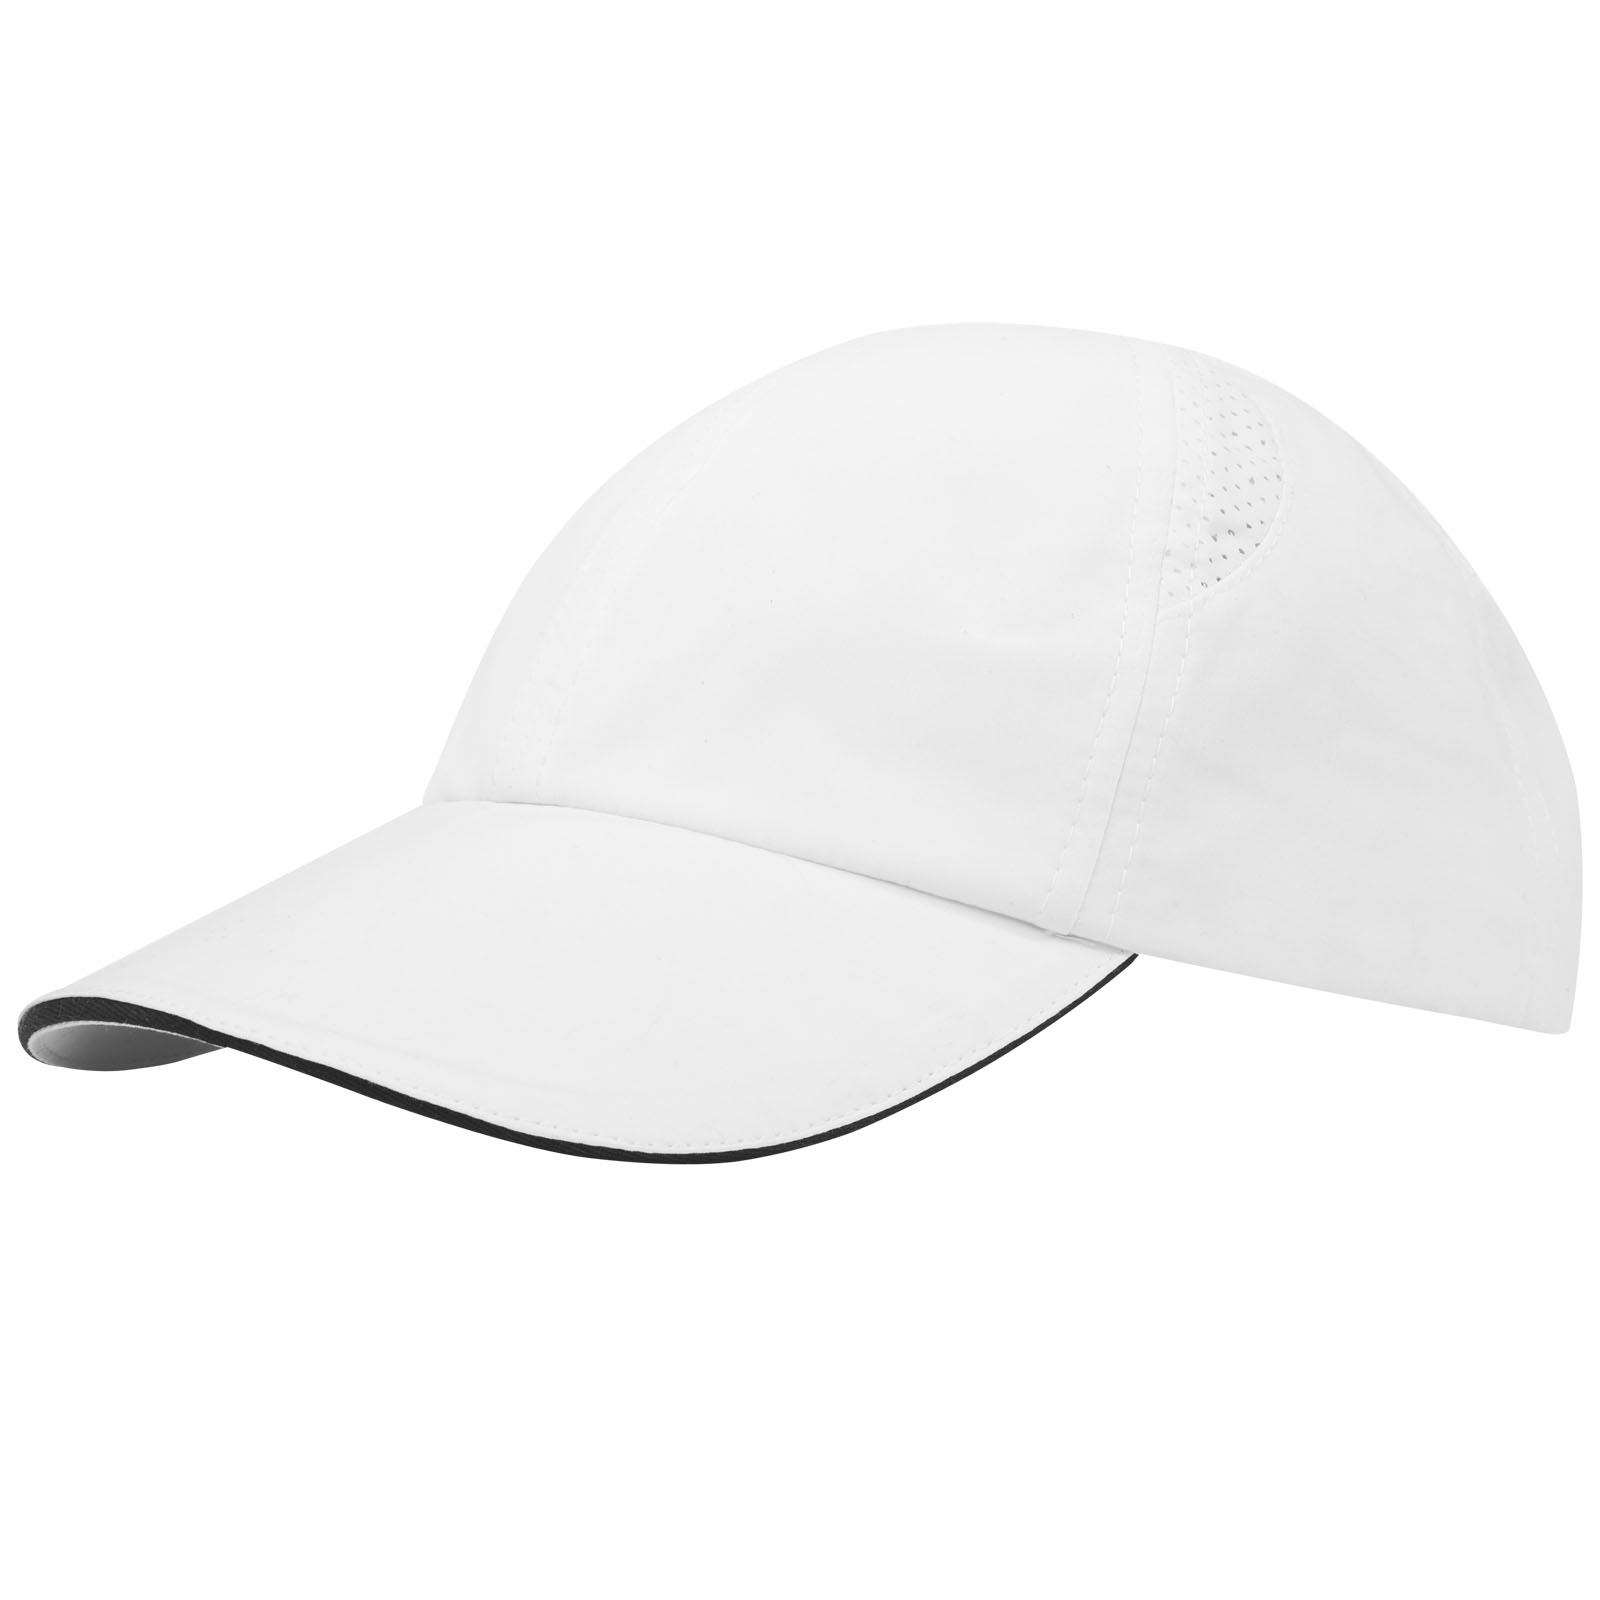 Advertising Caps & Hats - Morion 6 panel GRS recycled cool fit sandwich cap